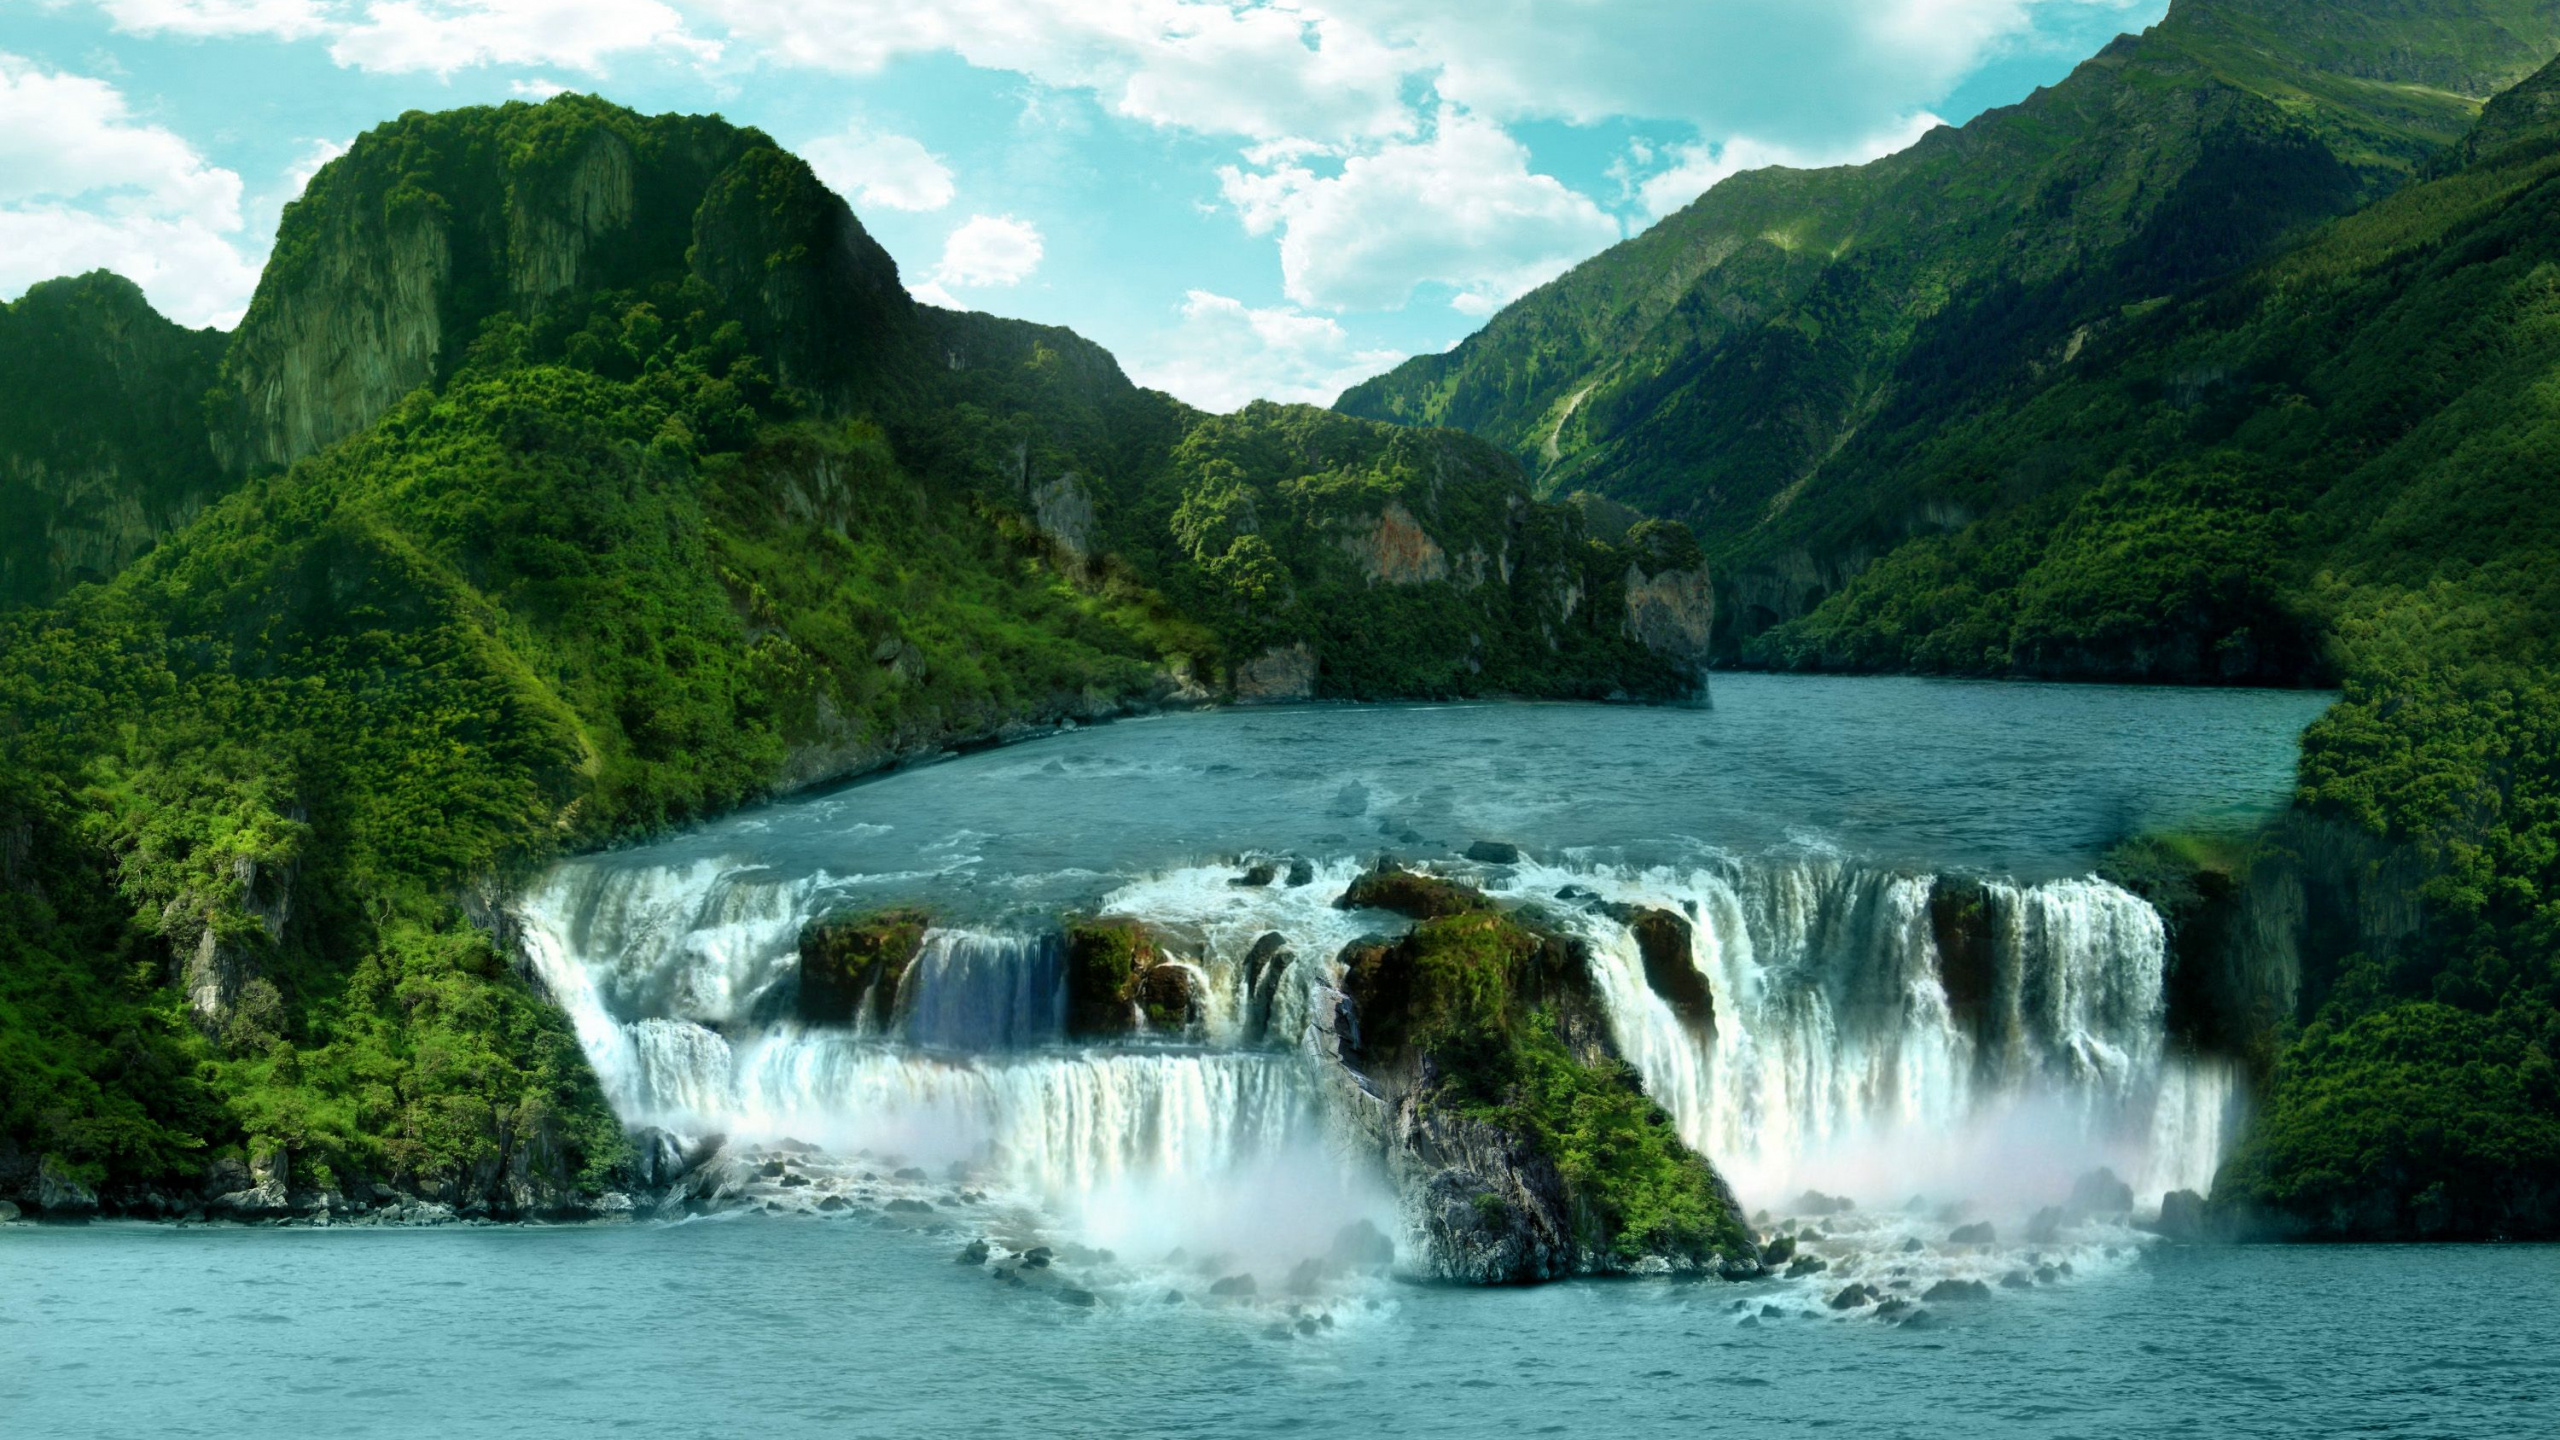 Water Falls on Green Mountain Under Blue Sky During Daytime. Wallpaper in 2560x1440 Resolution